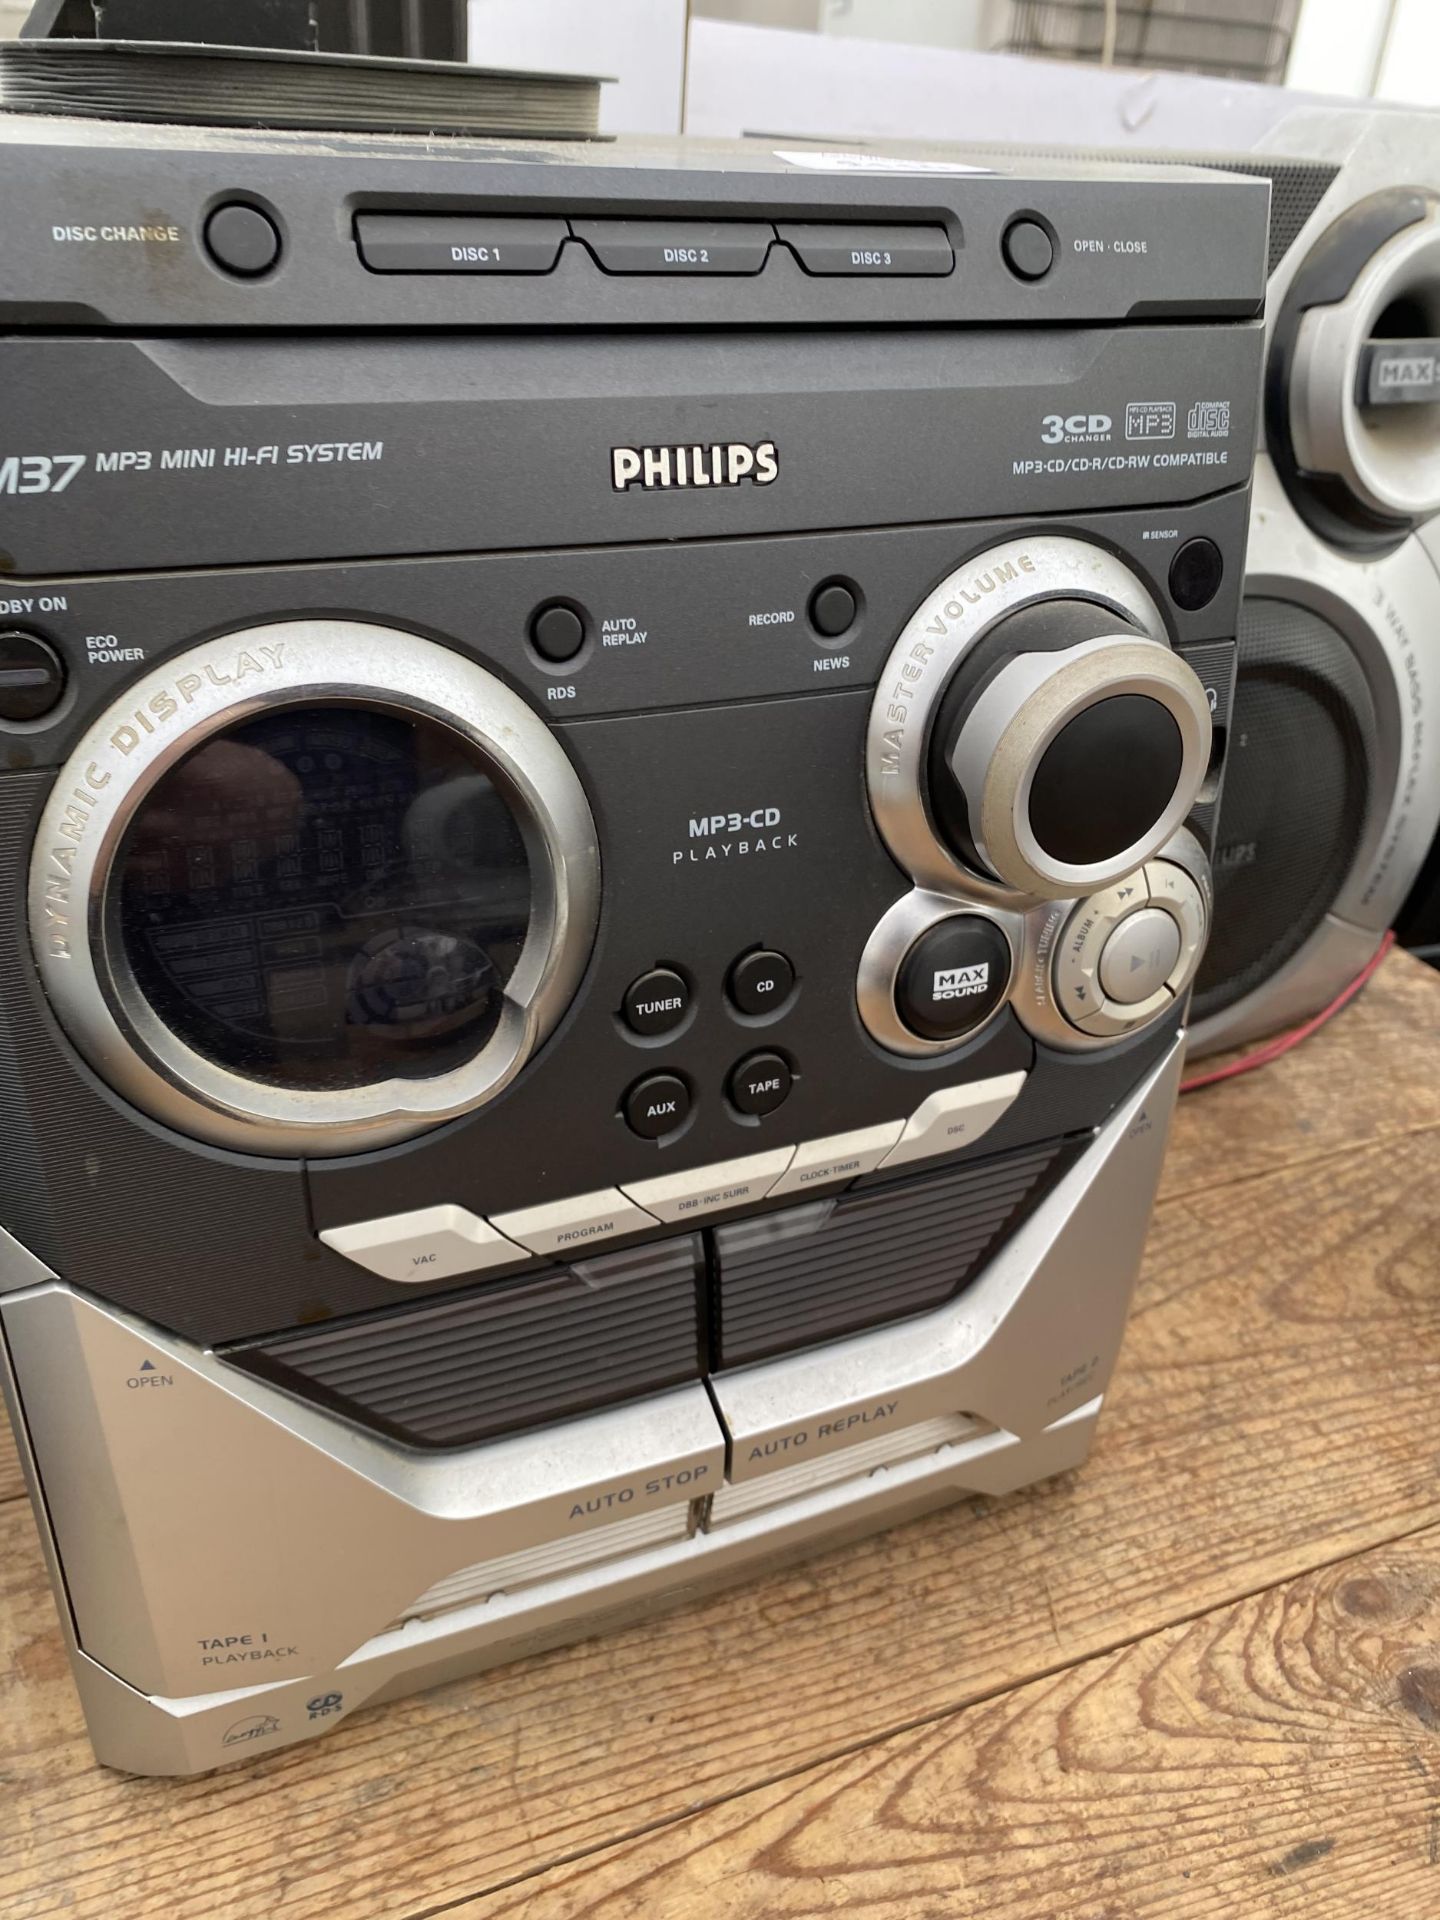 A PHILIPS STEREO SYSTEM WITH TWO SPEAKERS - Image 2 of 2